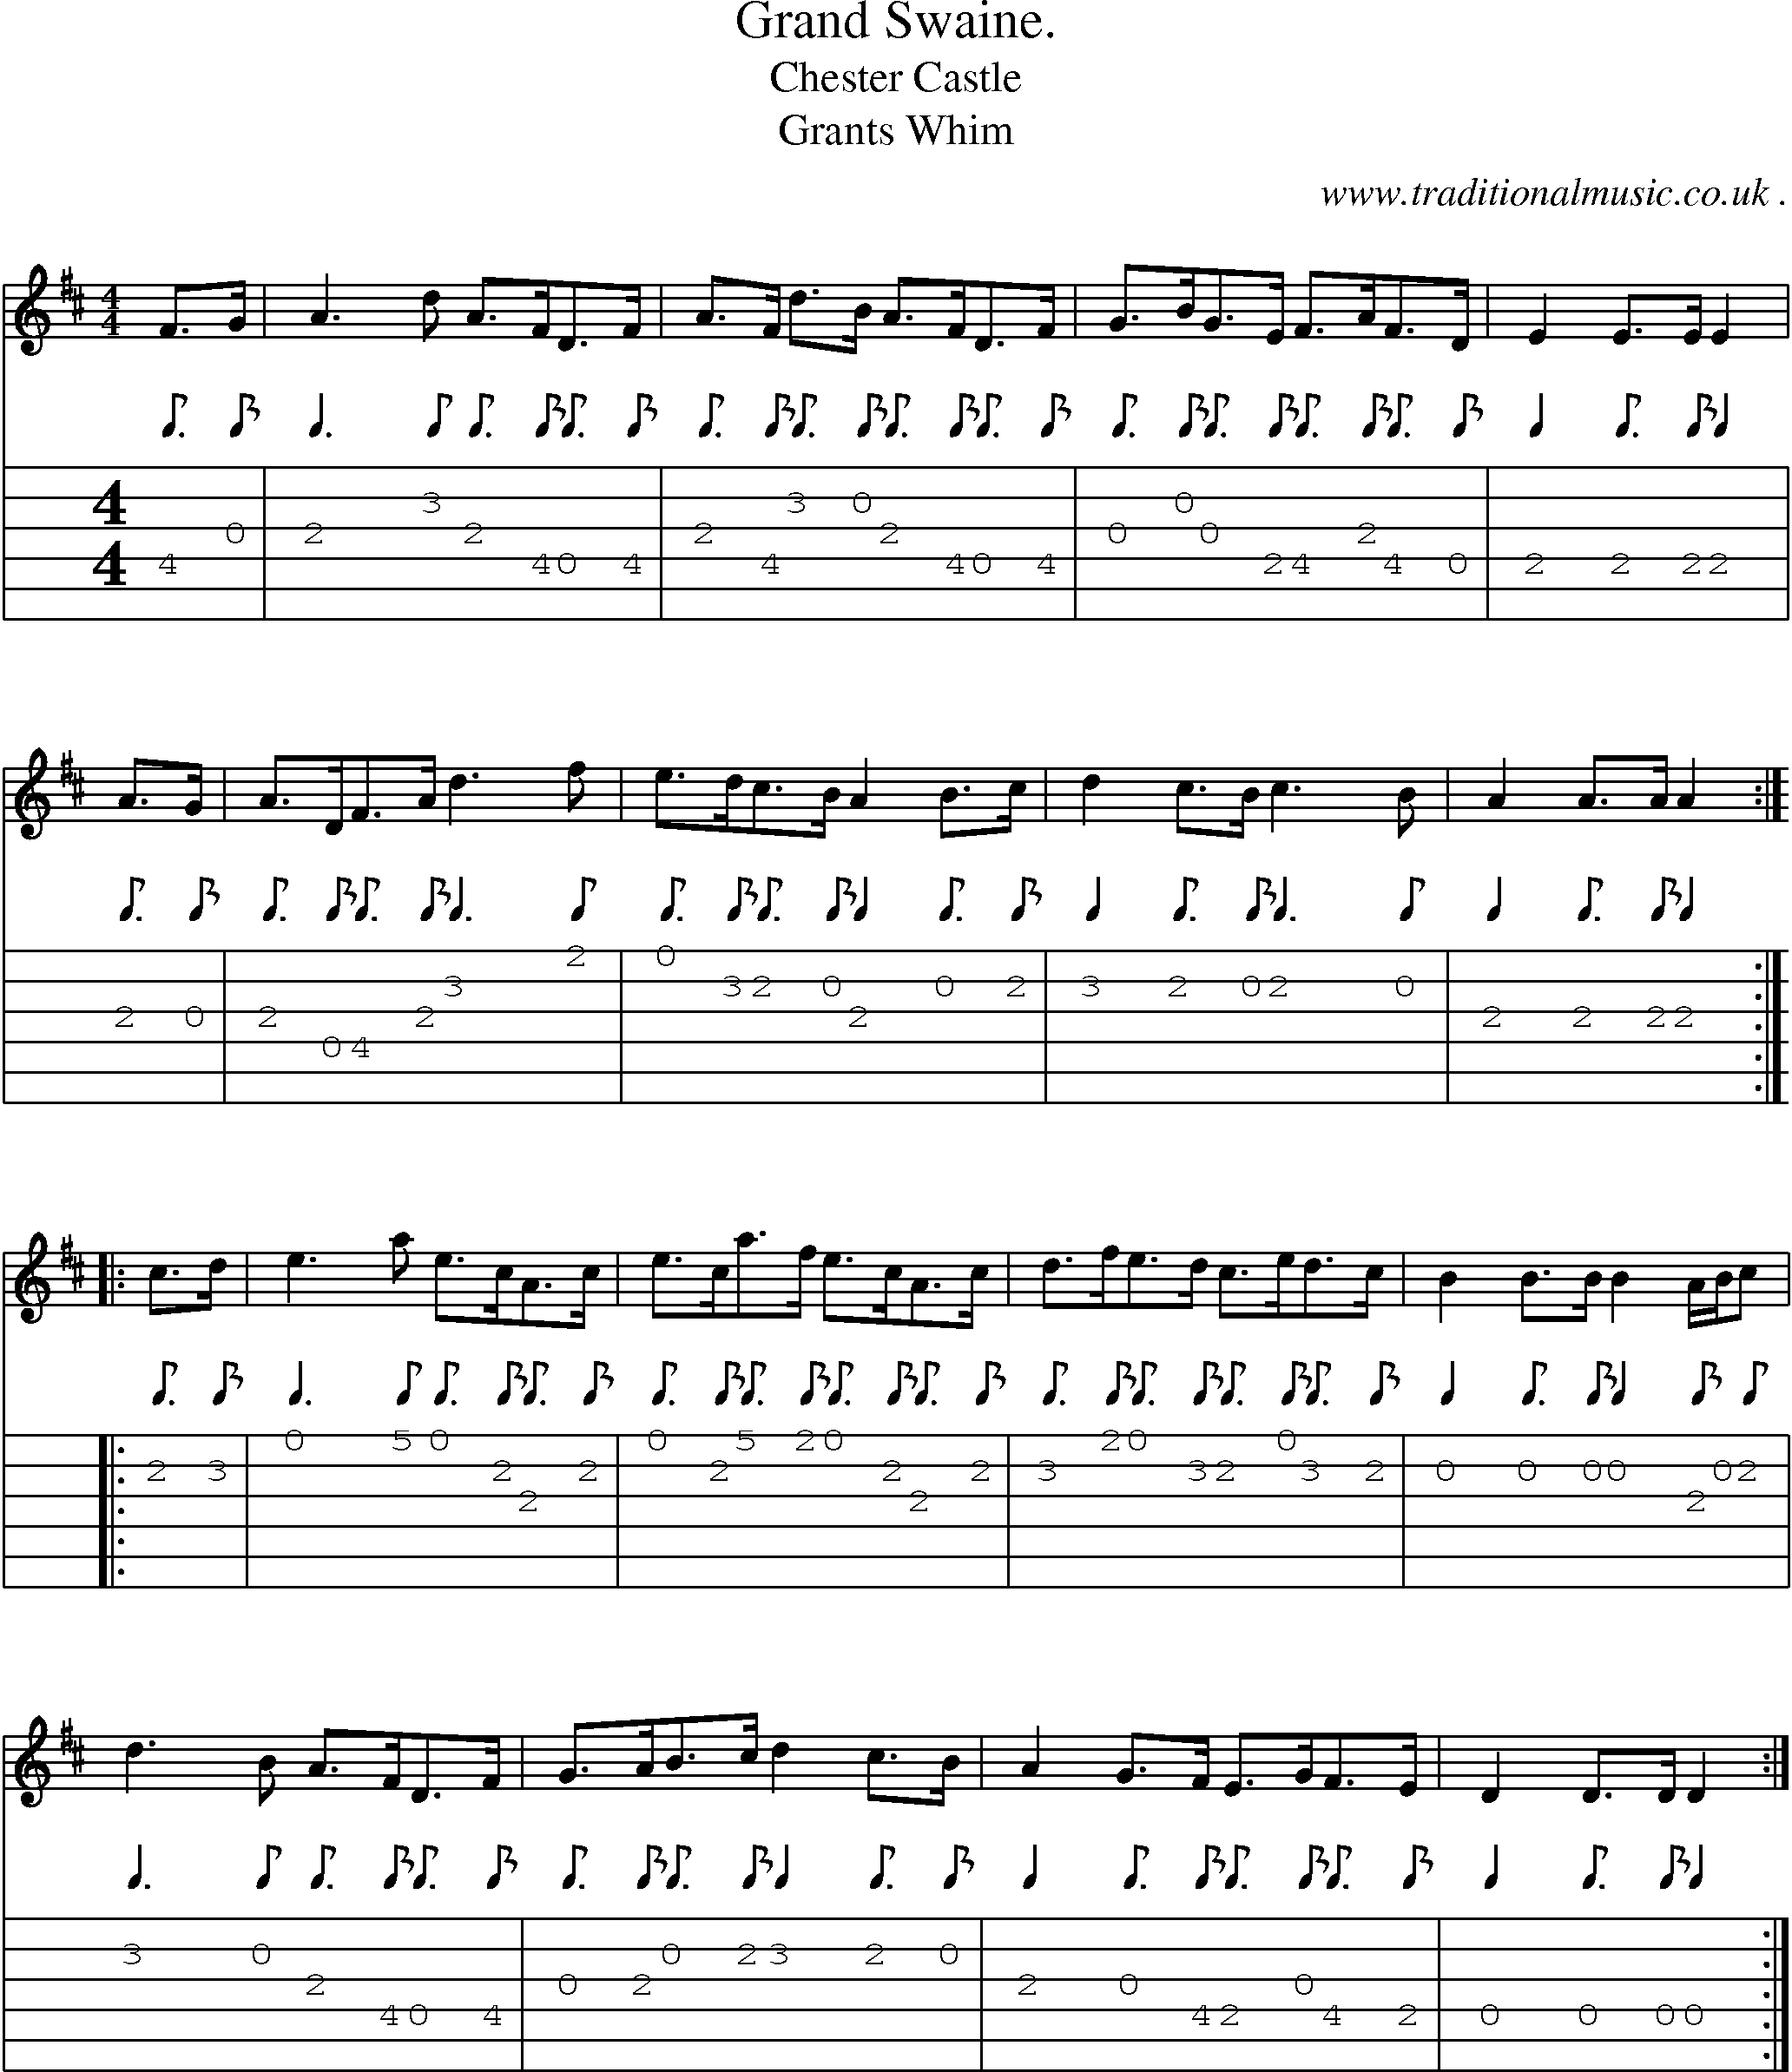 Sheet-Music and Guitar Tabs for Grand Swaine